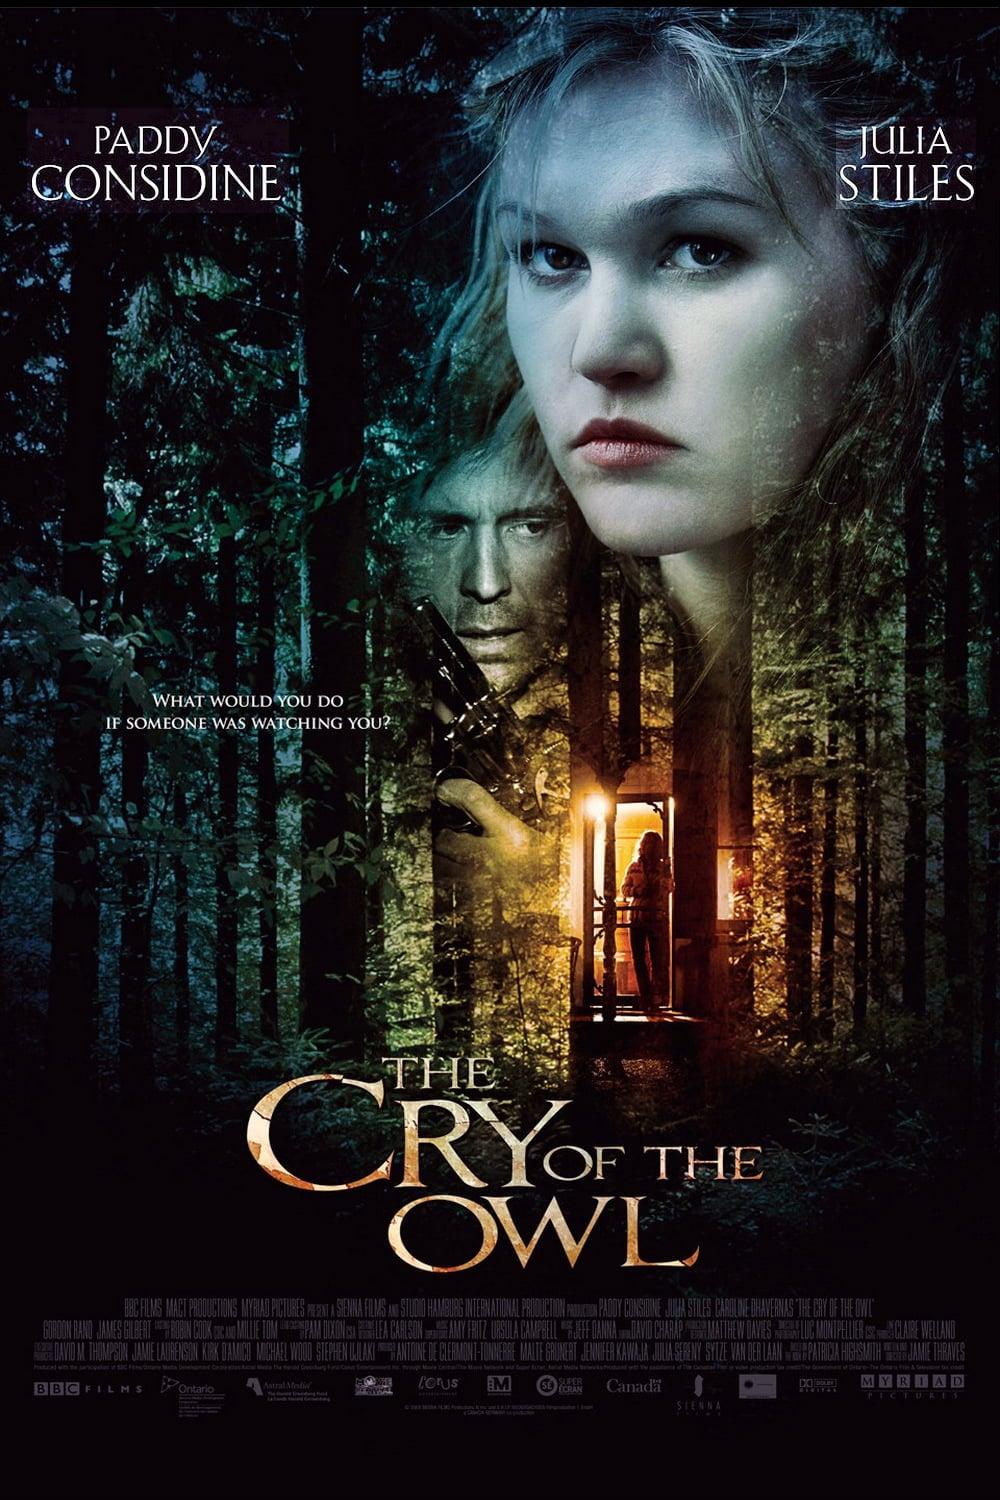 The Cry of the Owl poster